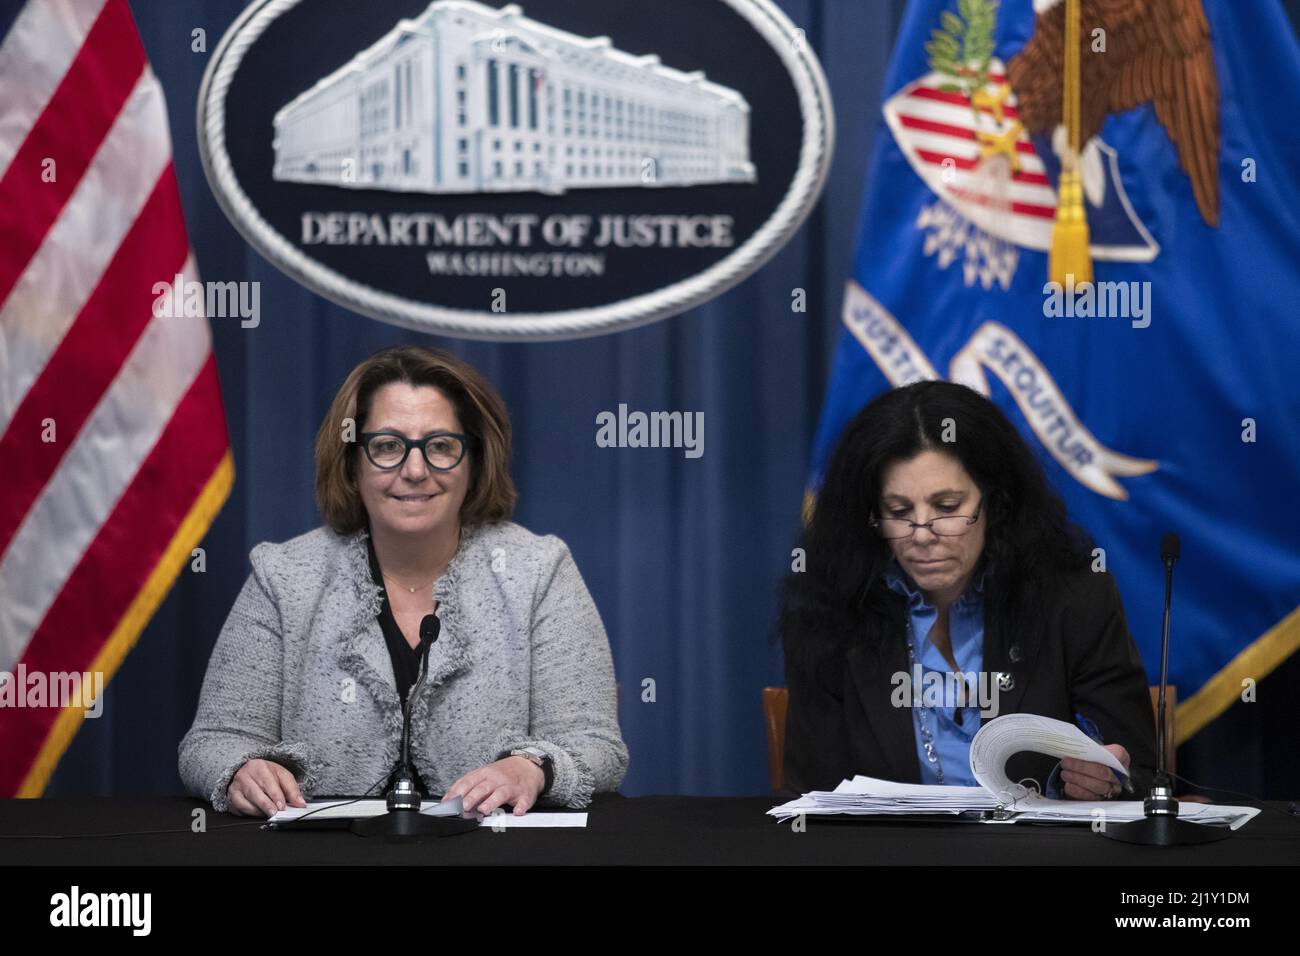 Washington, United States. 28th Mar, 2022. Deputy Attorney General Lisa Monaco (L) listens to a question from a journalist beside Deputy Assistant Attorney General Jolene Lauria (R) during a news conference on the Fiscal Year 2023 Budget Request at the U.S. Department of Justice in Washington, DC on Monday, March 28, 2022. Pool Photo by Tom Brenner/UPI Credit: UPI/Alamy Live News Stock Photo